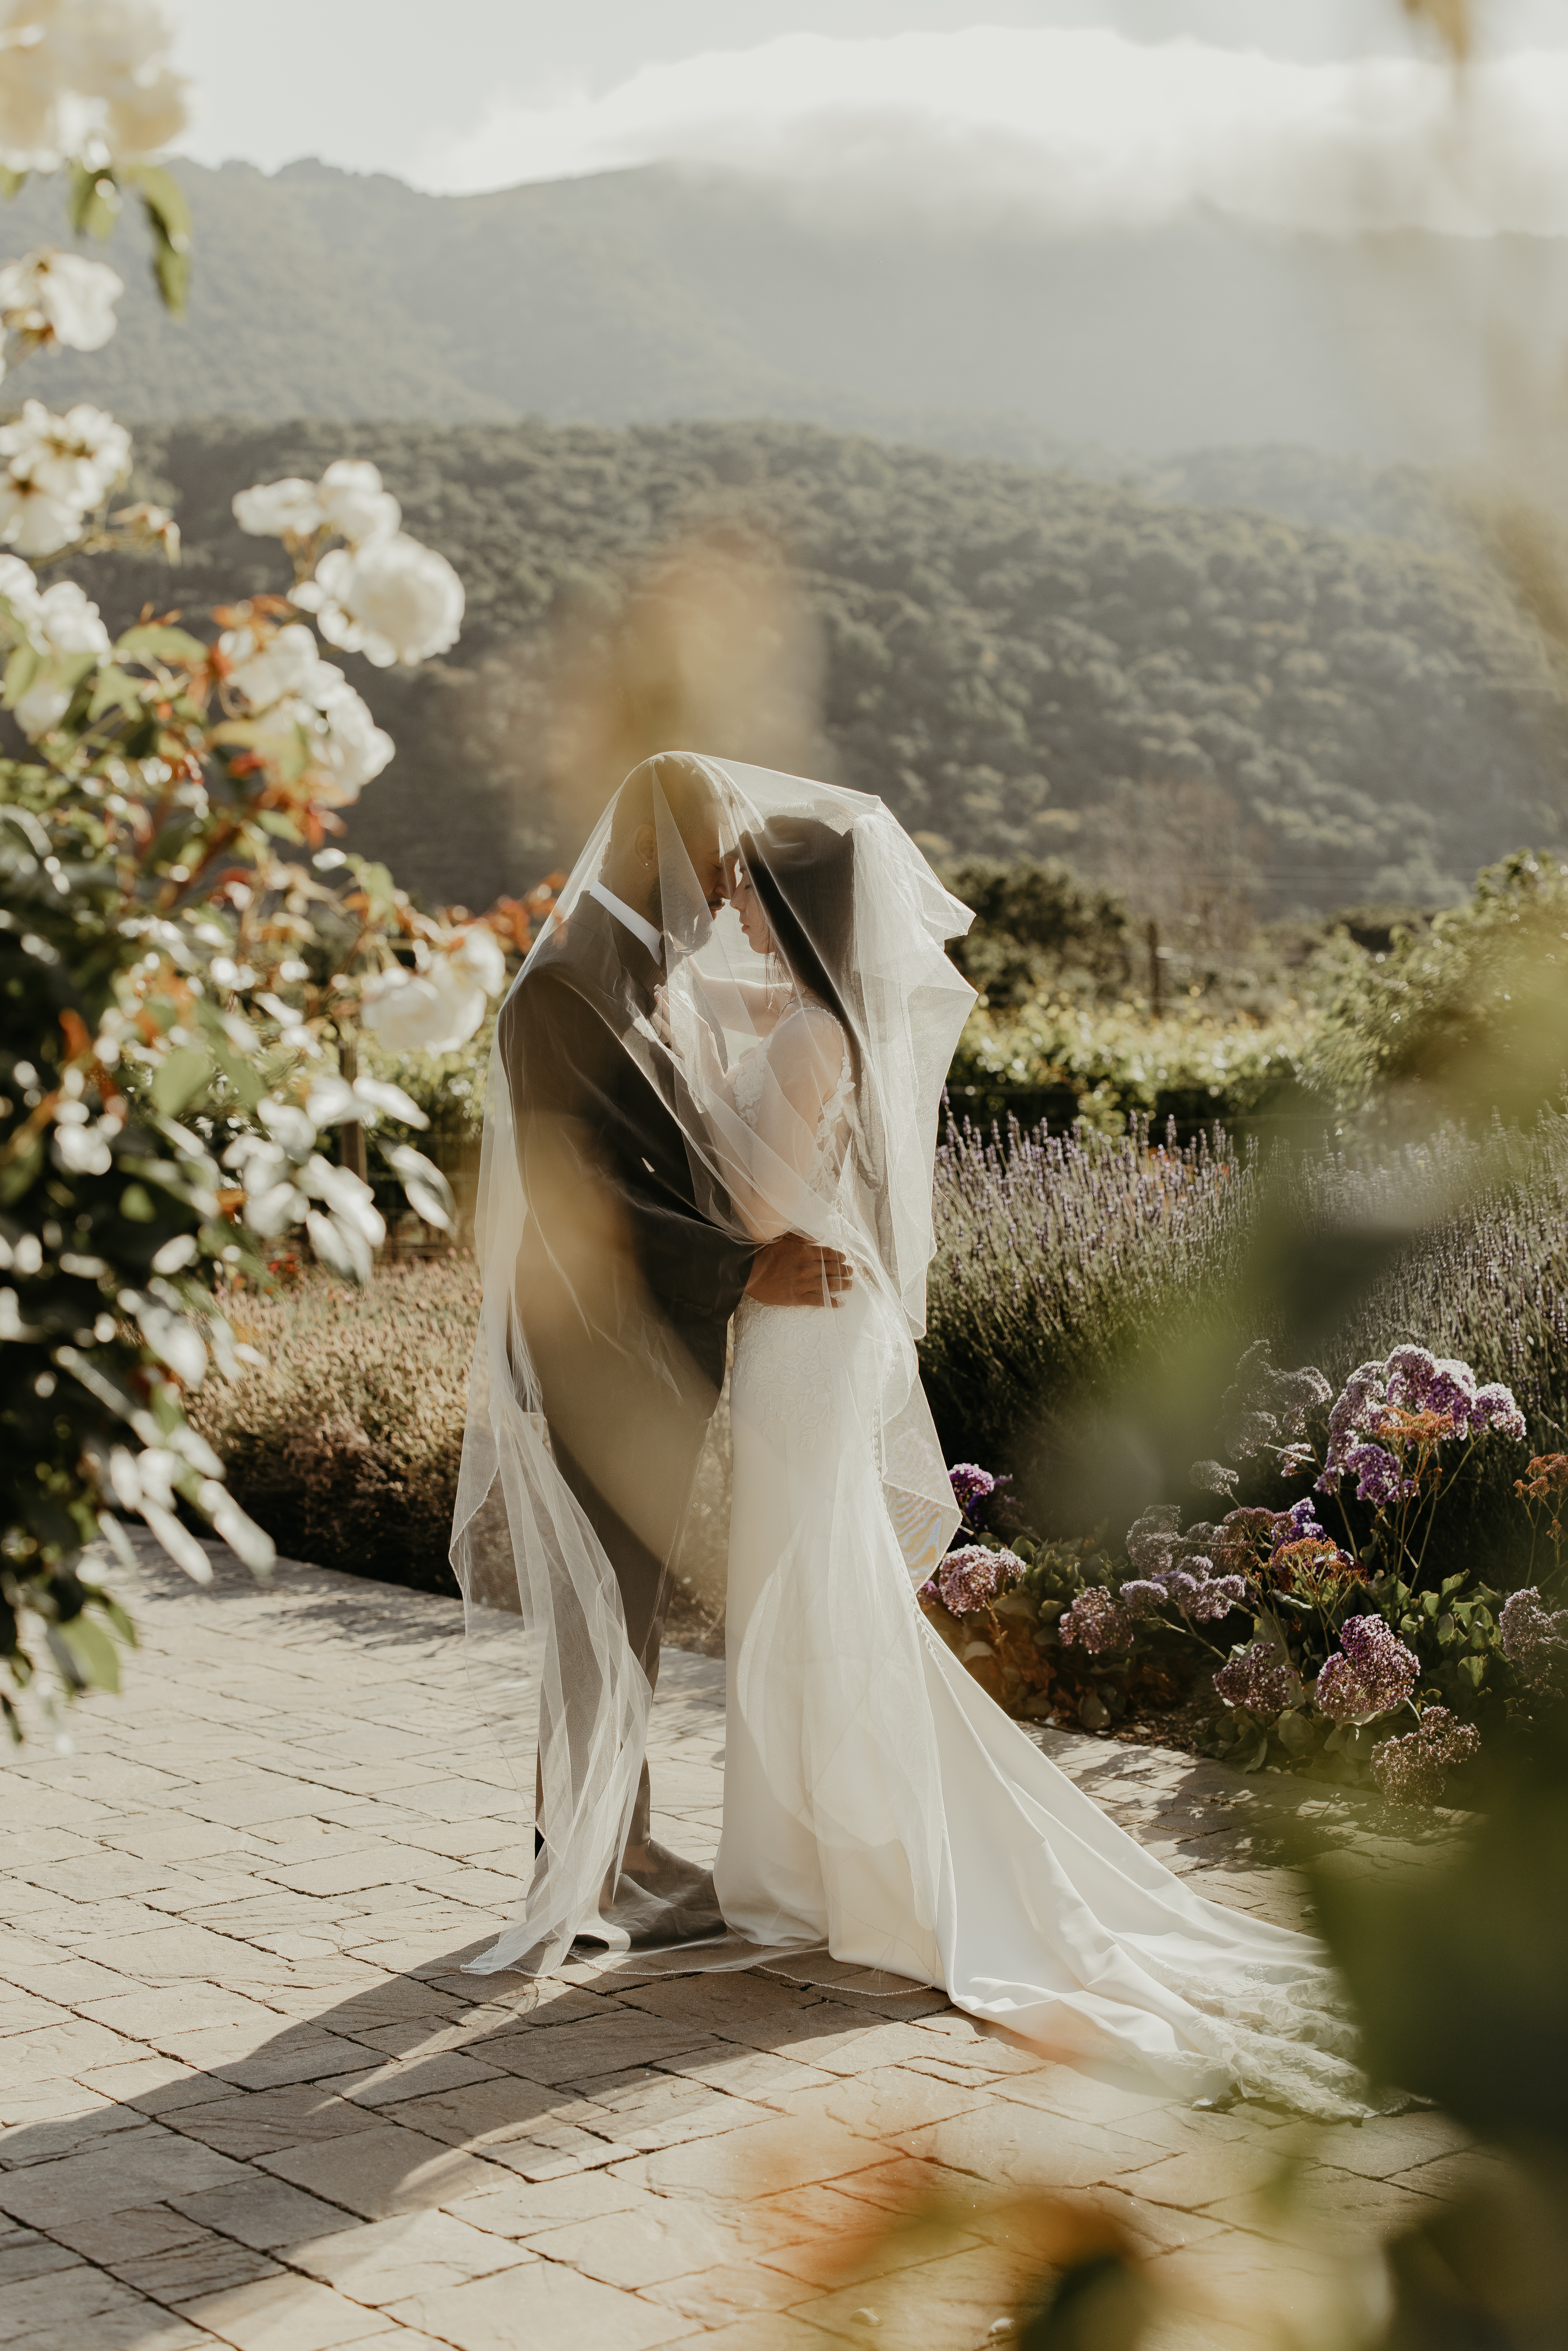 Bride and groom say I do at bernardus lodge in Carmel Valley, CA